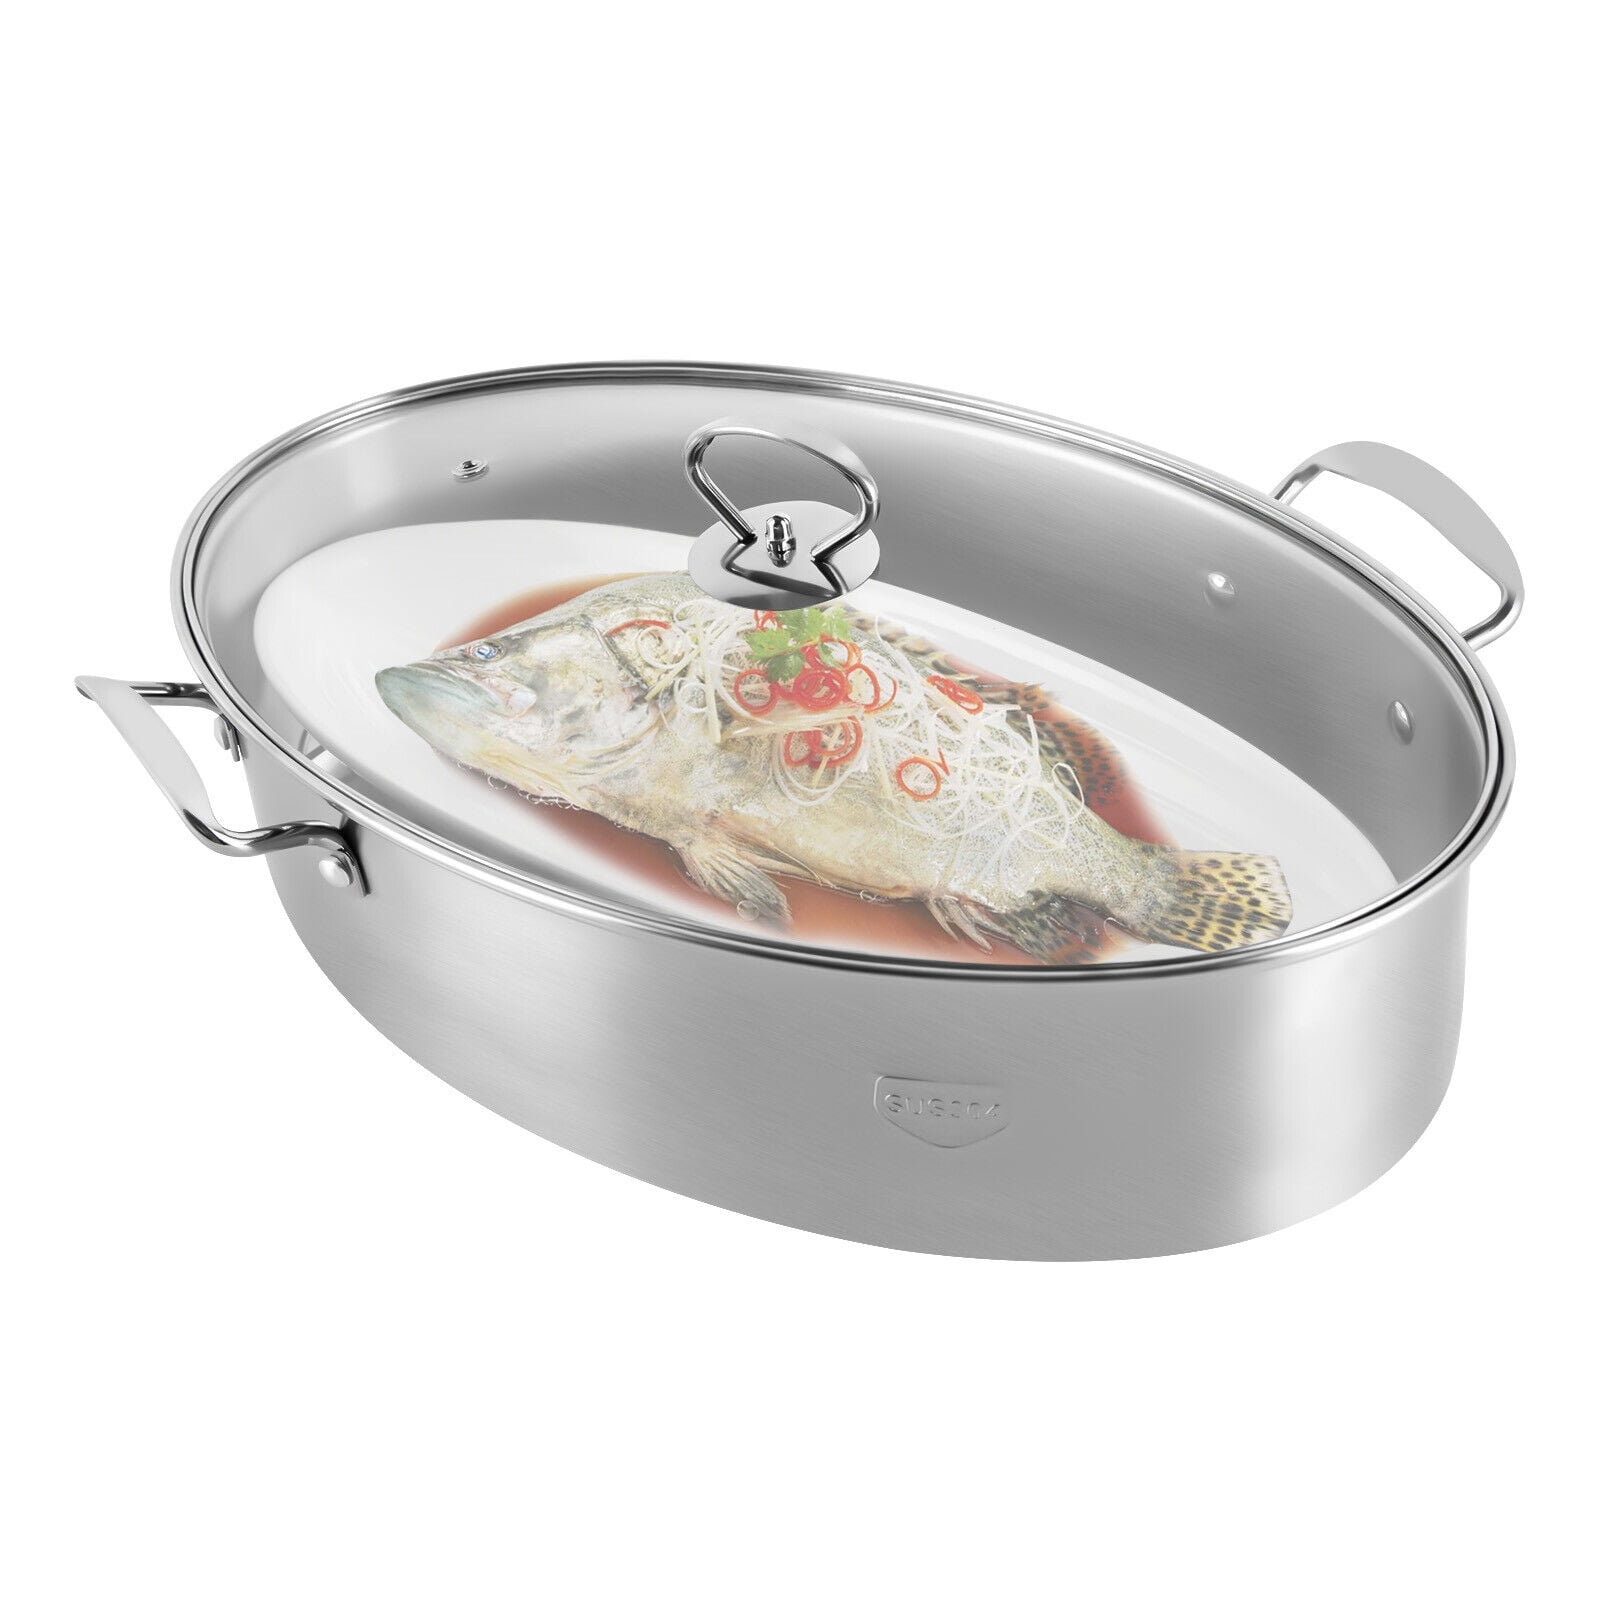 OUKANING Stainless Steel Oval Steamer Cookware Fish Steamer ...